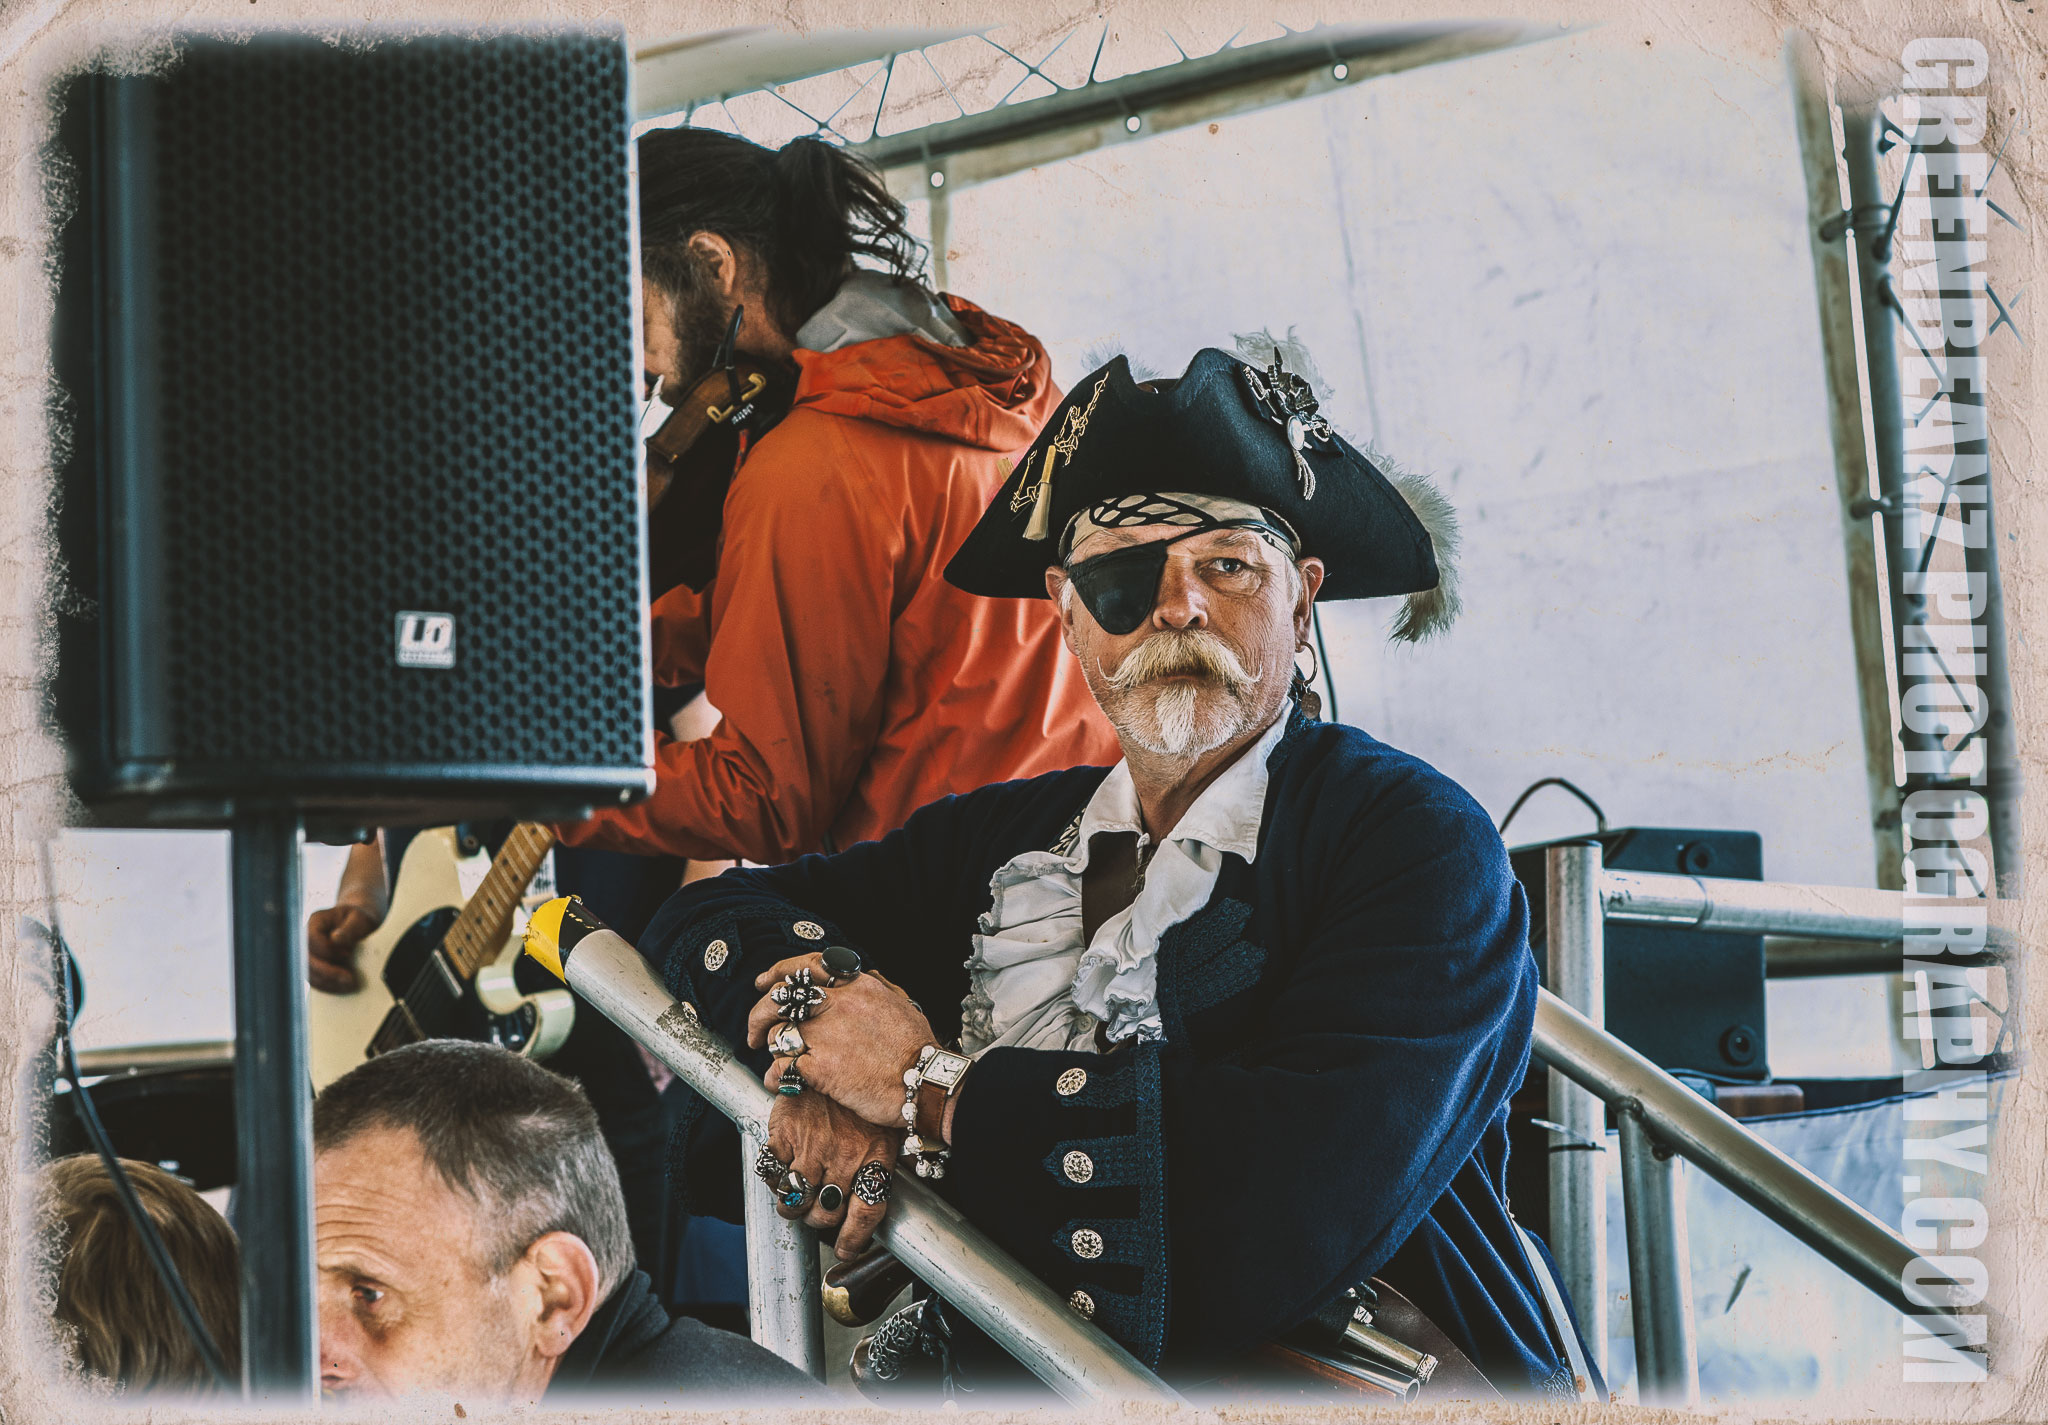 Compere and Commitee member of the Pirate Festival in Brixham